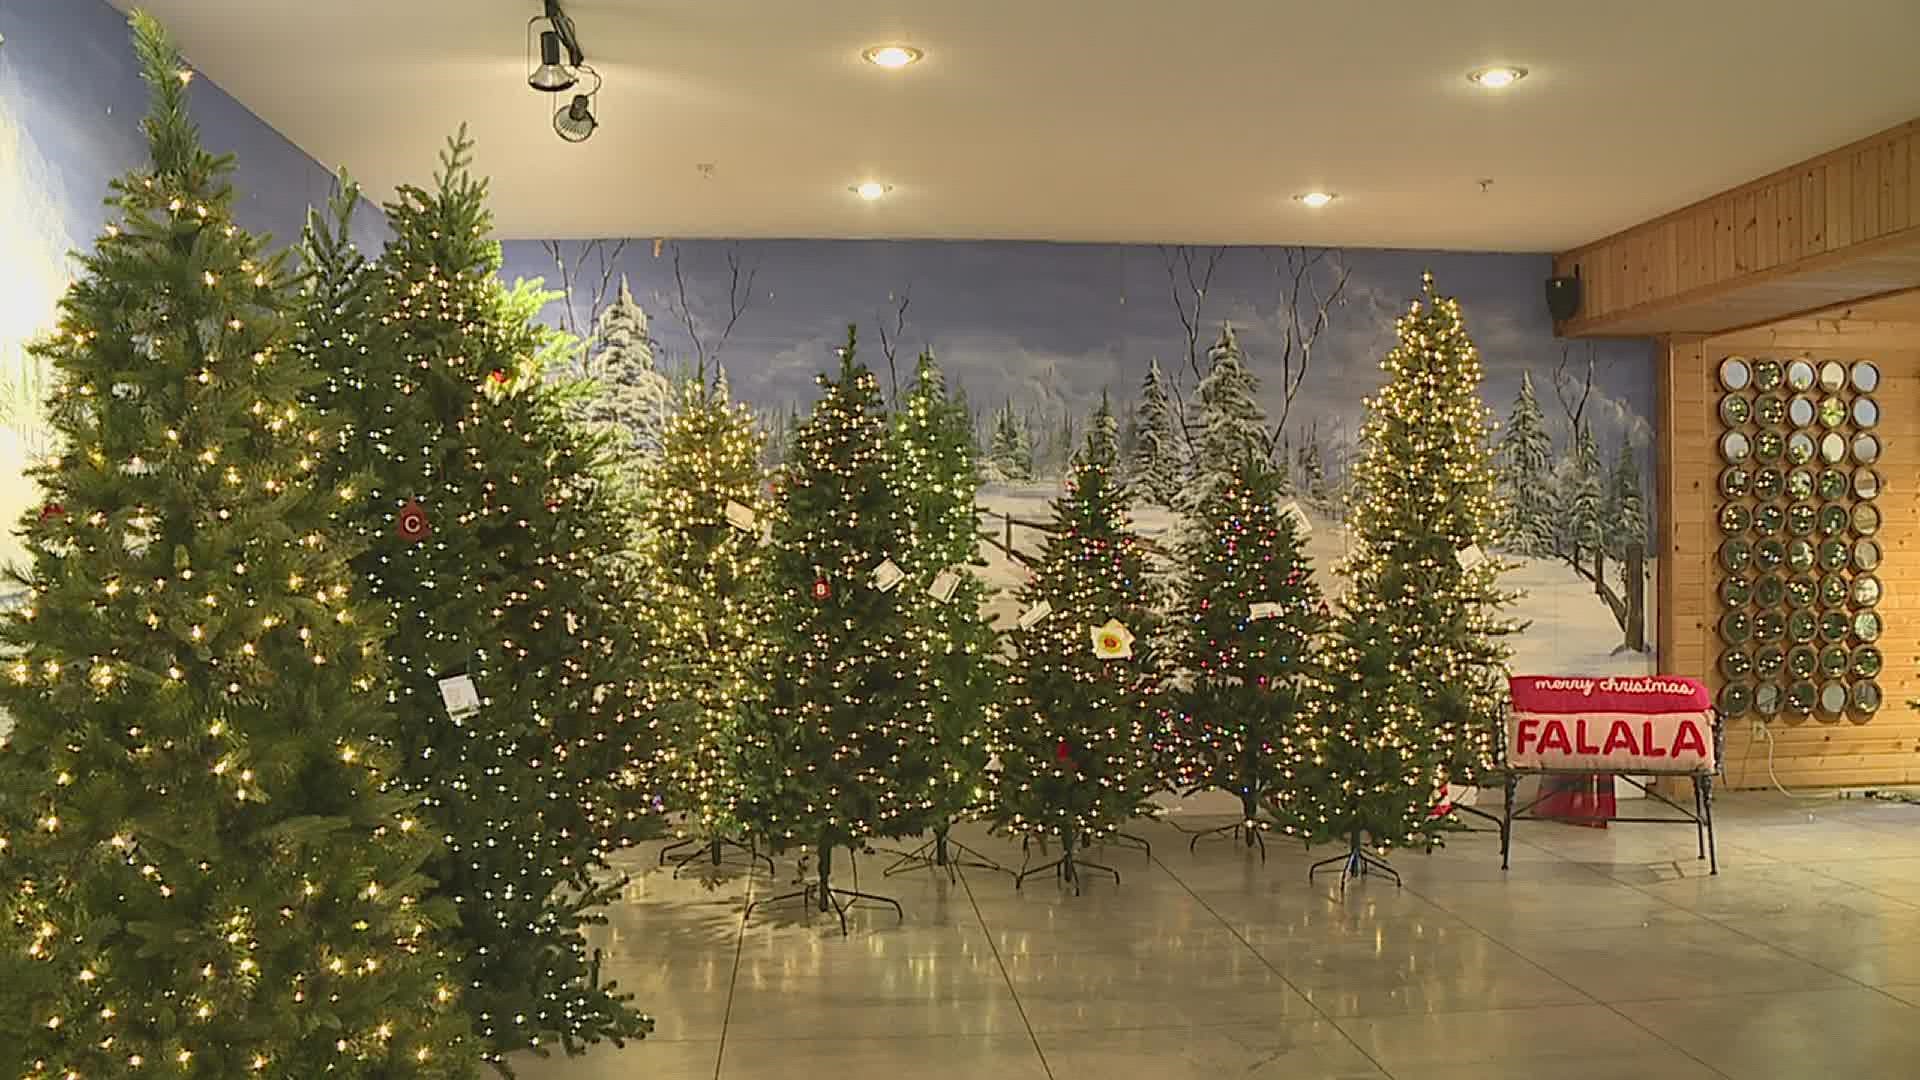 This year there's a shortage of both artificial and live Christmas trees due to global supply chain issues and extreme weather.